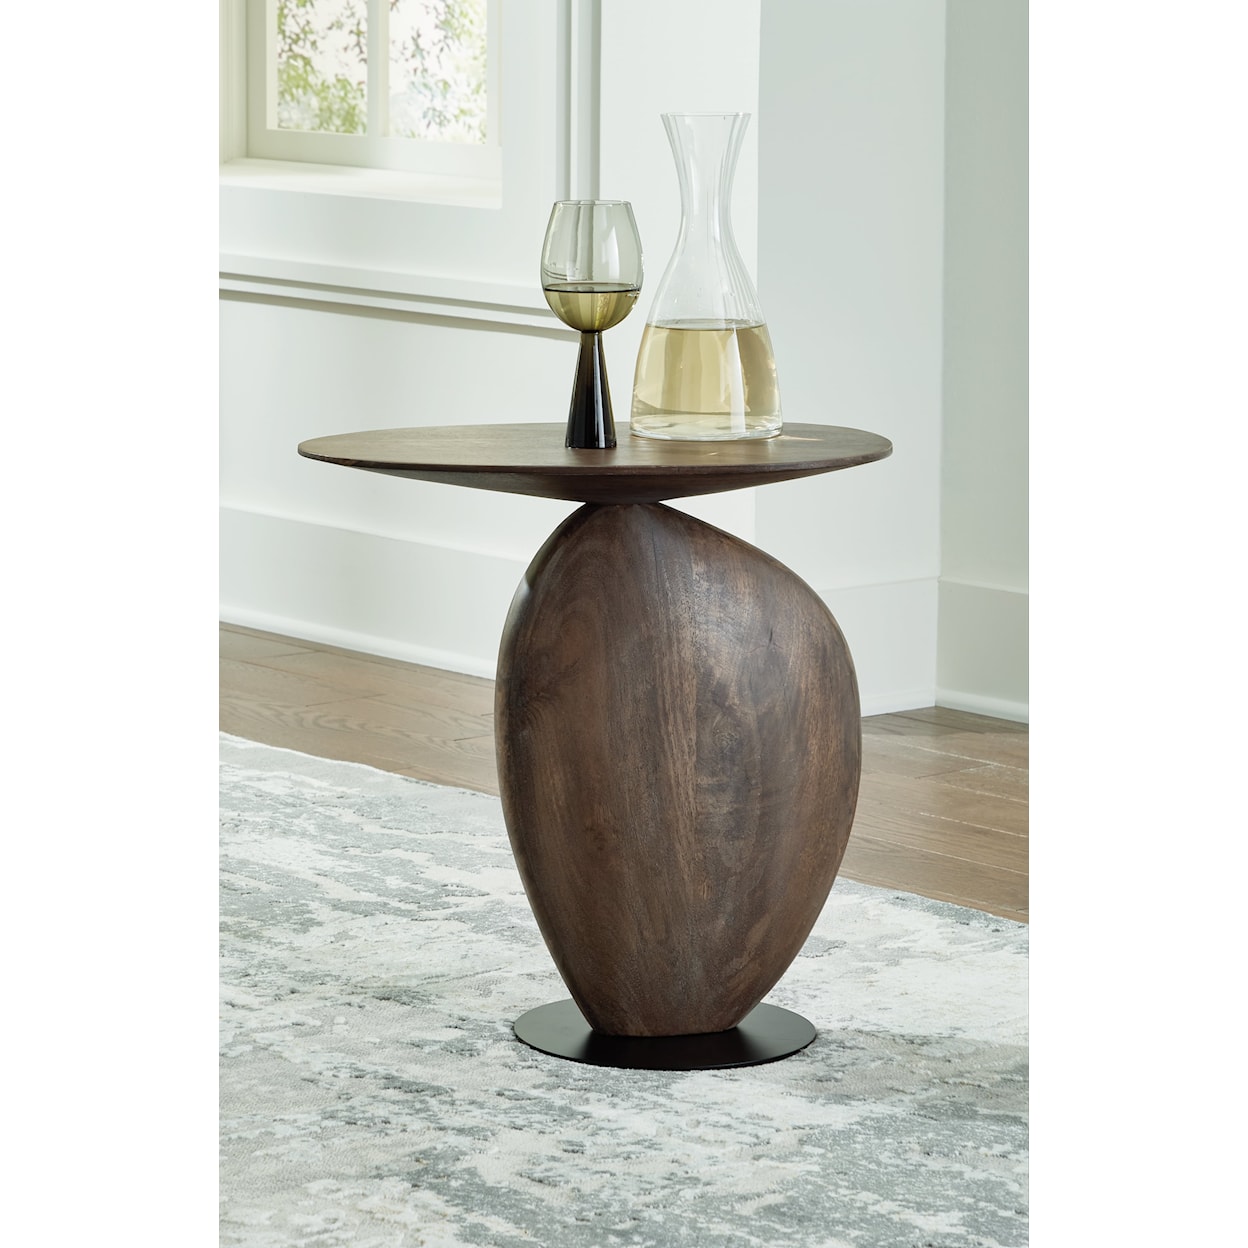 Benchcraft Cormmet Accent Table